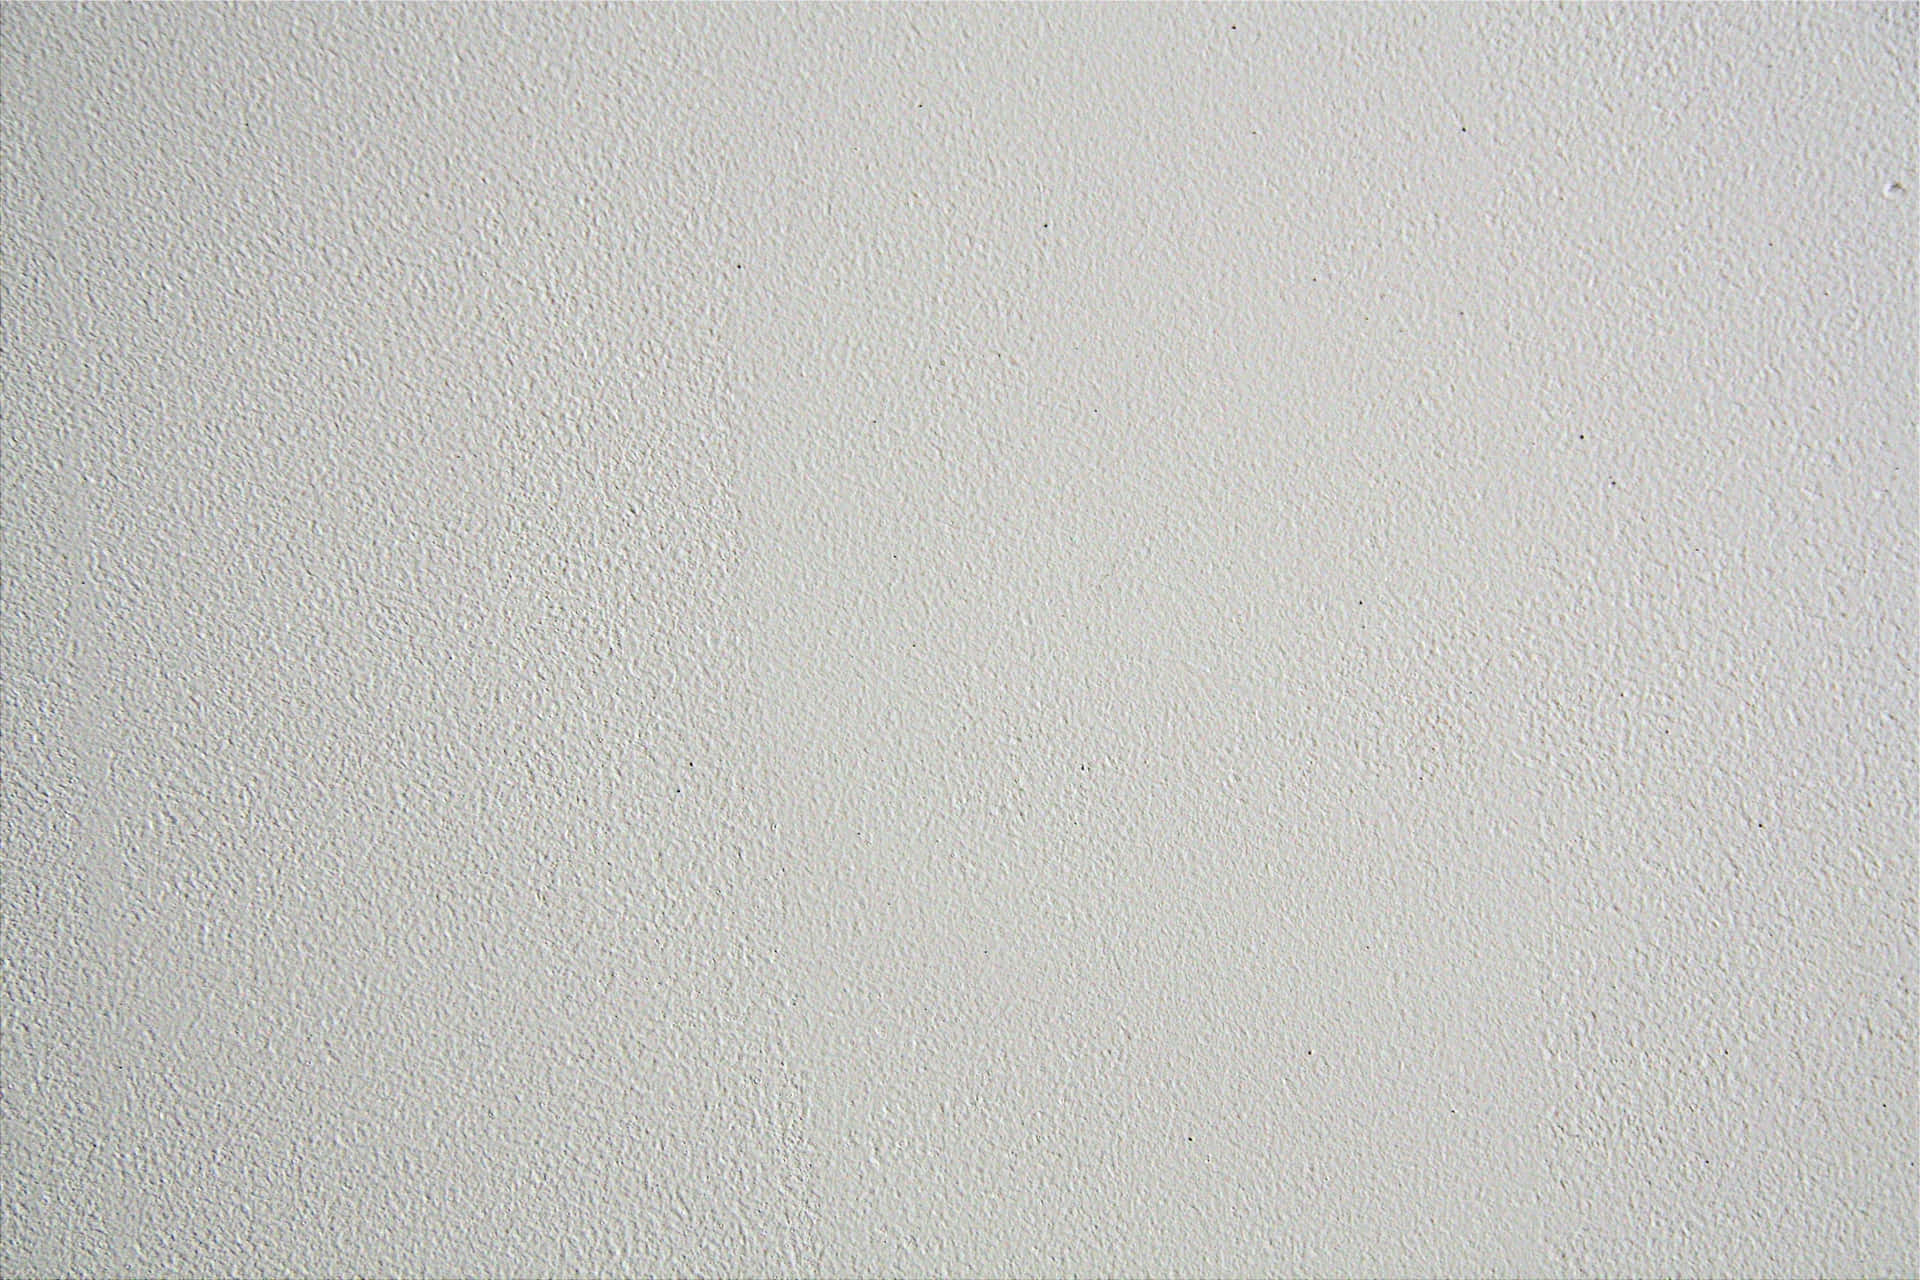 Immaculate White Wall in High-Definition